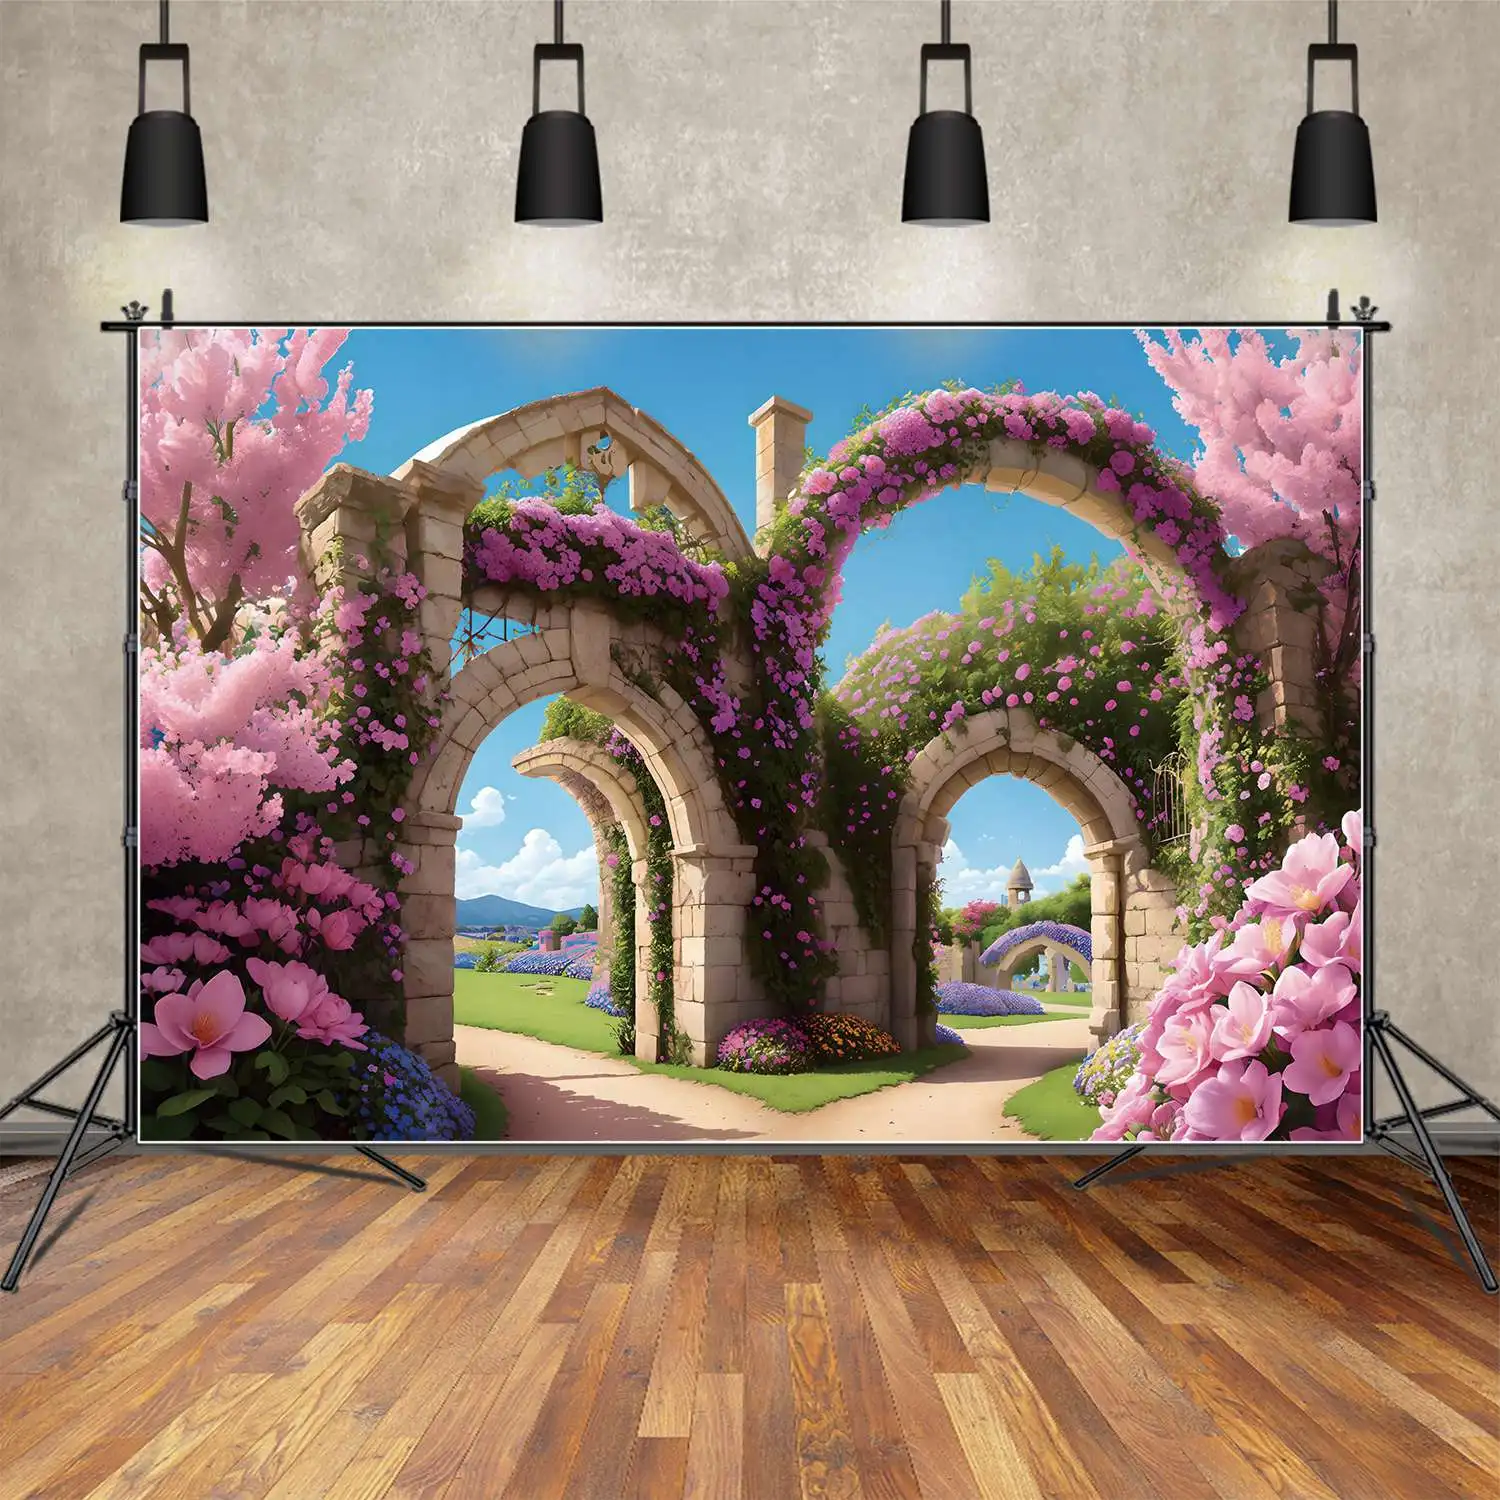 

Spring Flowers Outing Holiday Photo Backdrops Children's Wild Park Floral Blossom Birthday Home Decoration Photoshoot Background